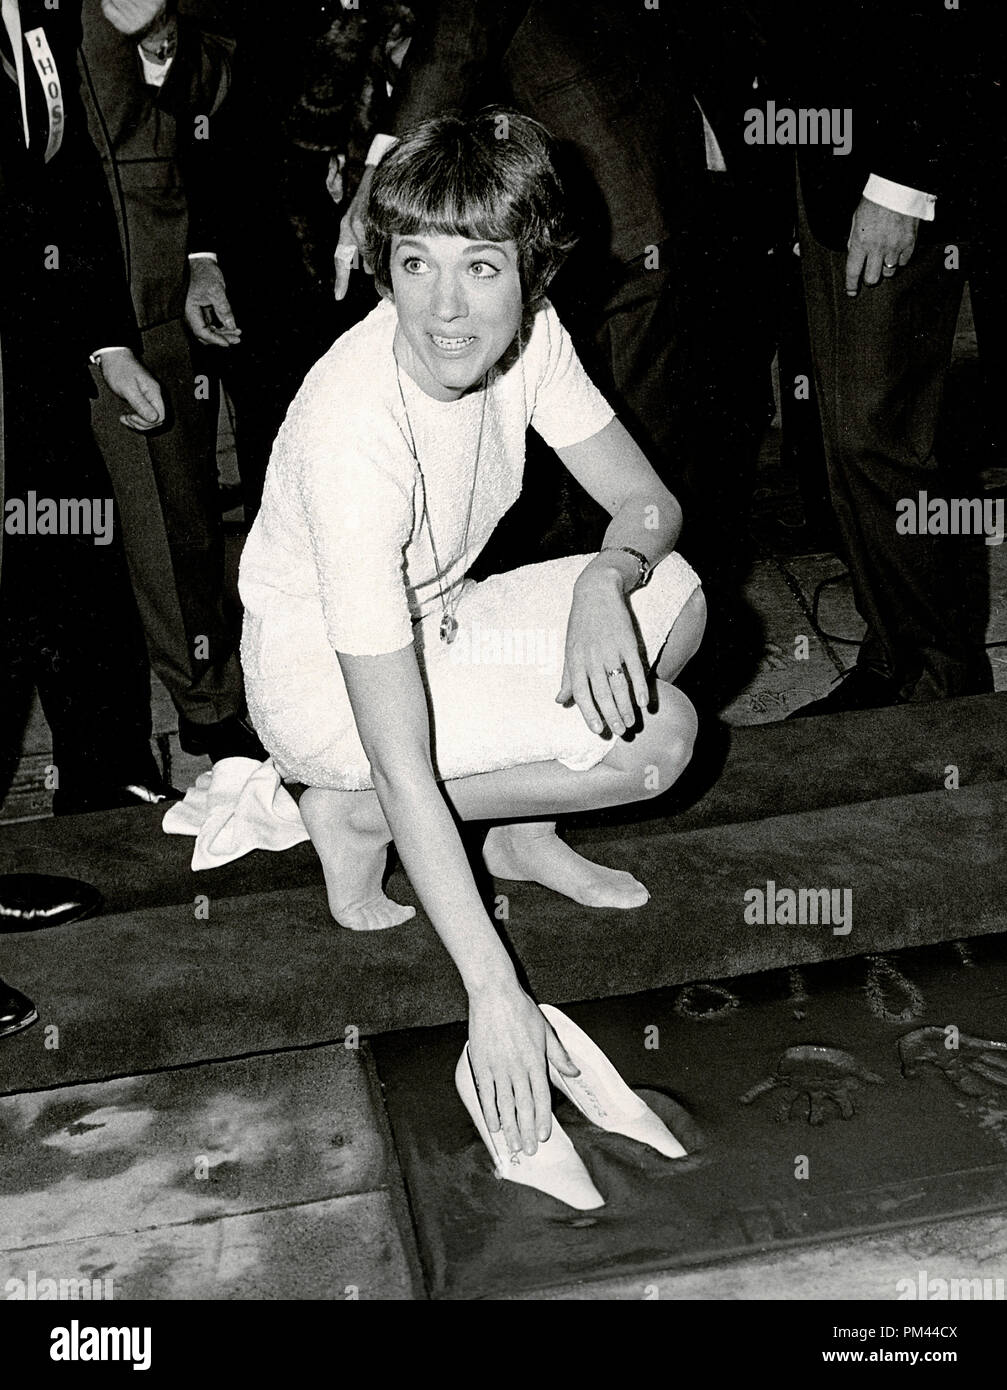 Julie Andrews placing her footprints in cement at Graumann's Chinese  Theatre on March 26,1966. File Reference #1021 002THA © JRC /The Hollywood  Archive - All Rights Reserved Stock Photo - Alamy